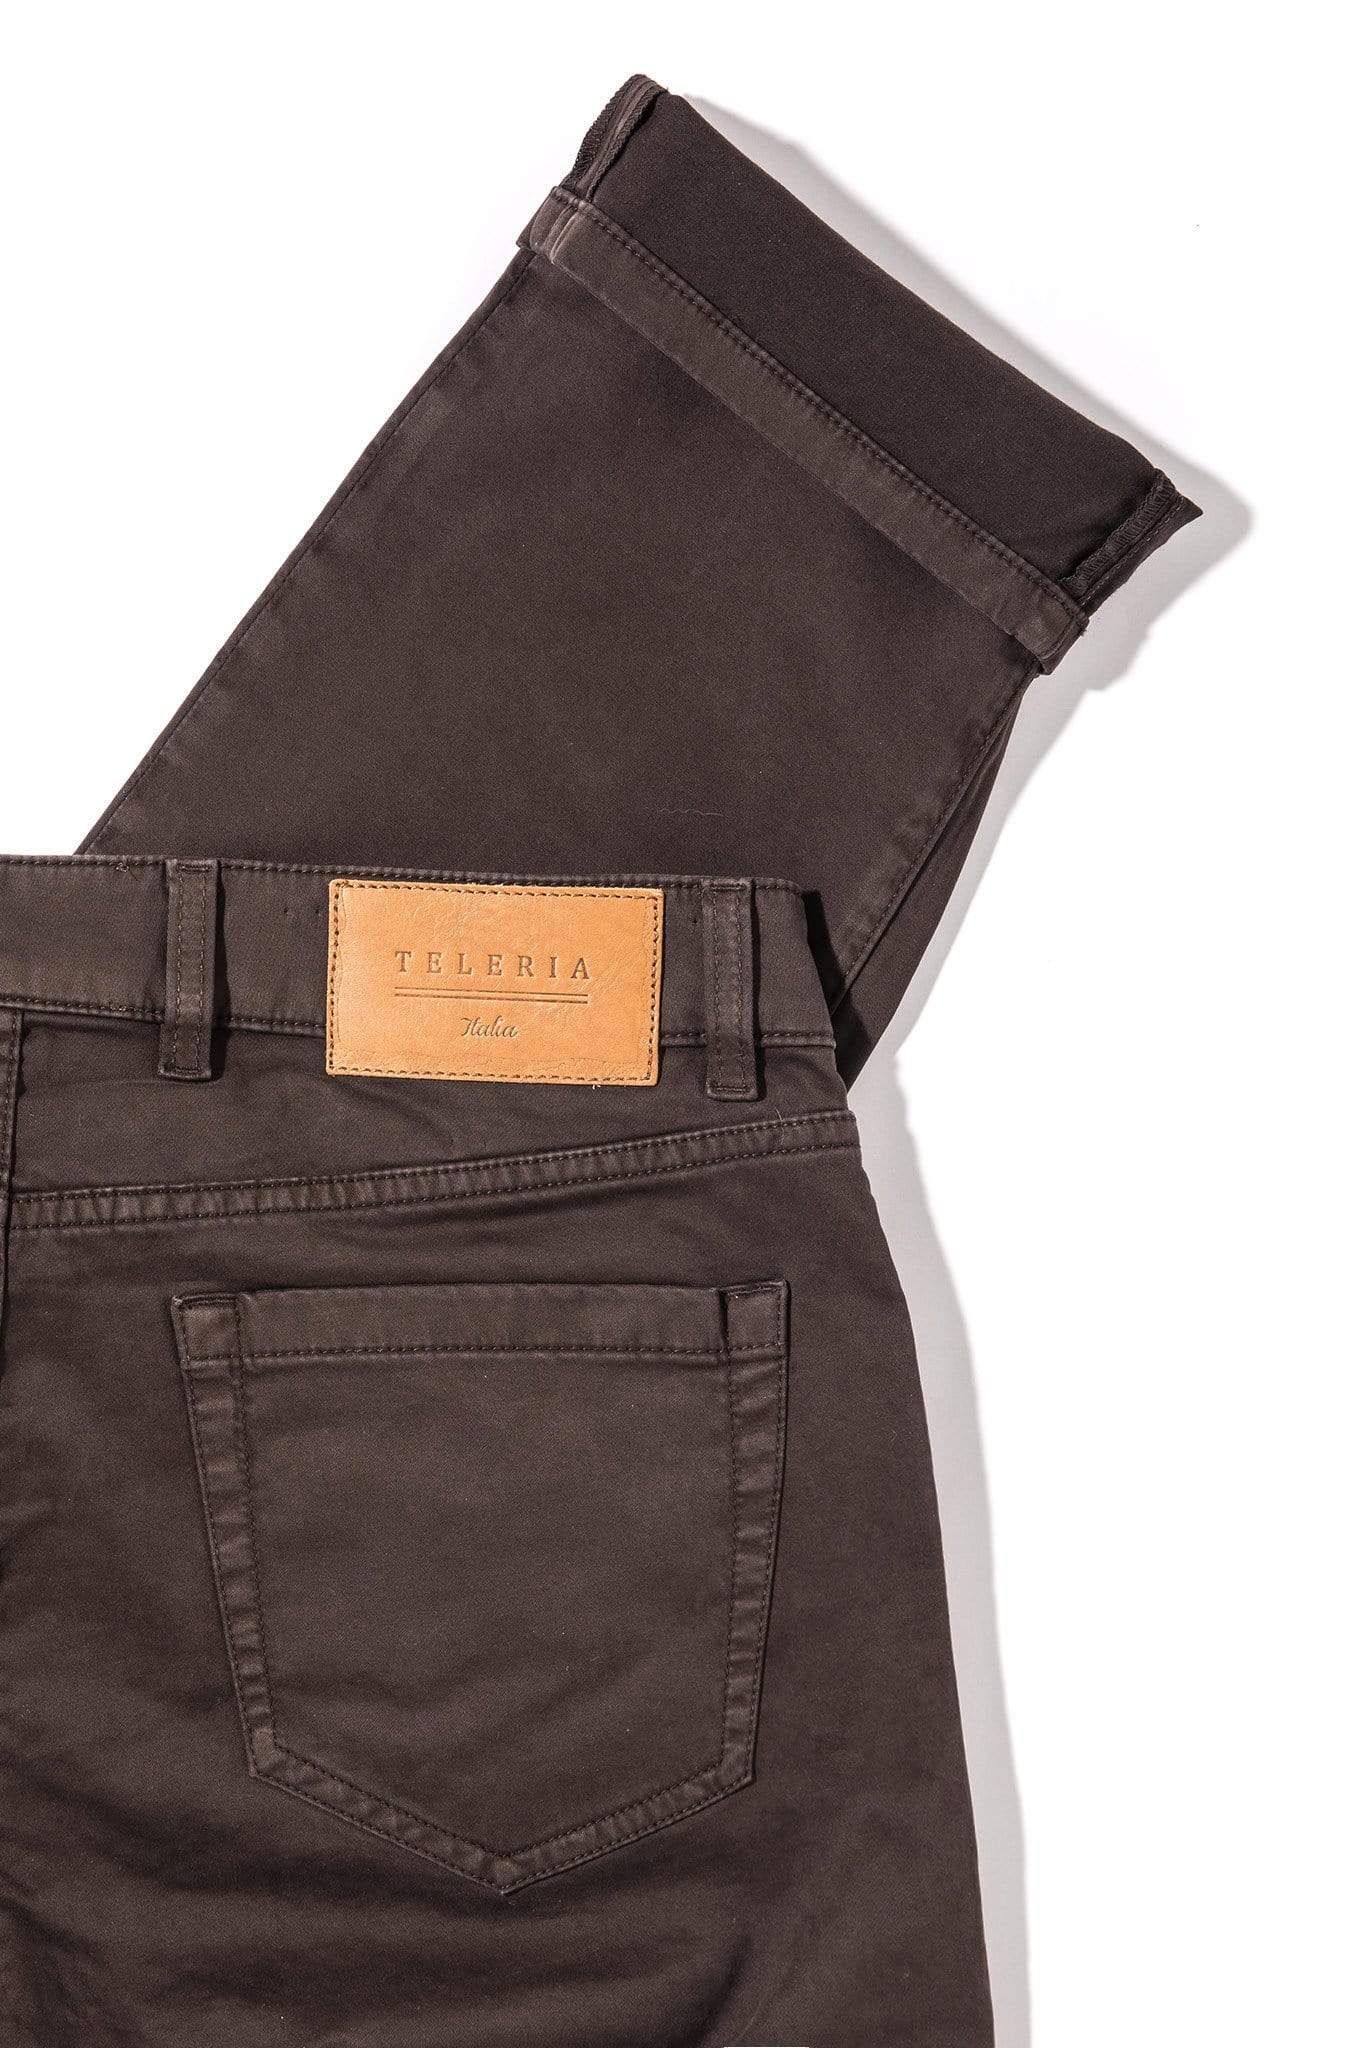 Yuma Soft Touch In Wenge | Mens - Pants - 5 Pocket | Teleria Zed